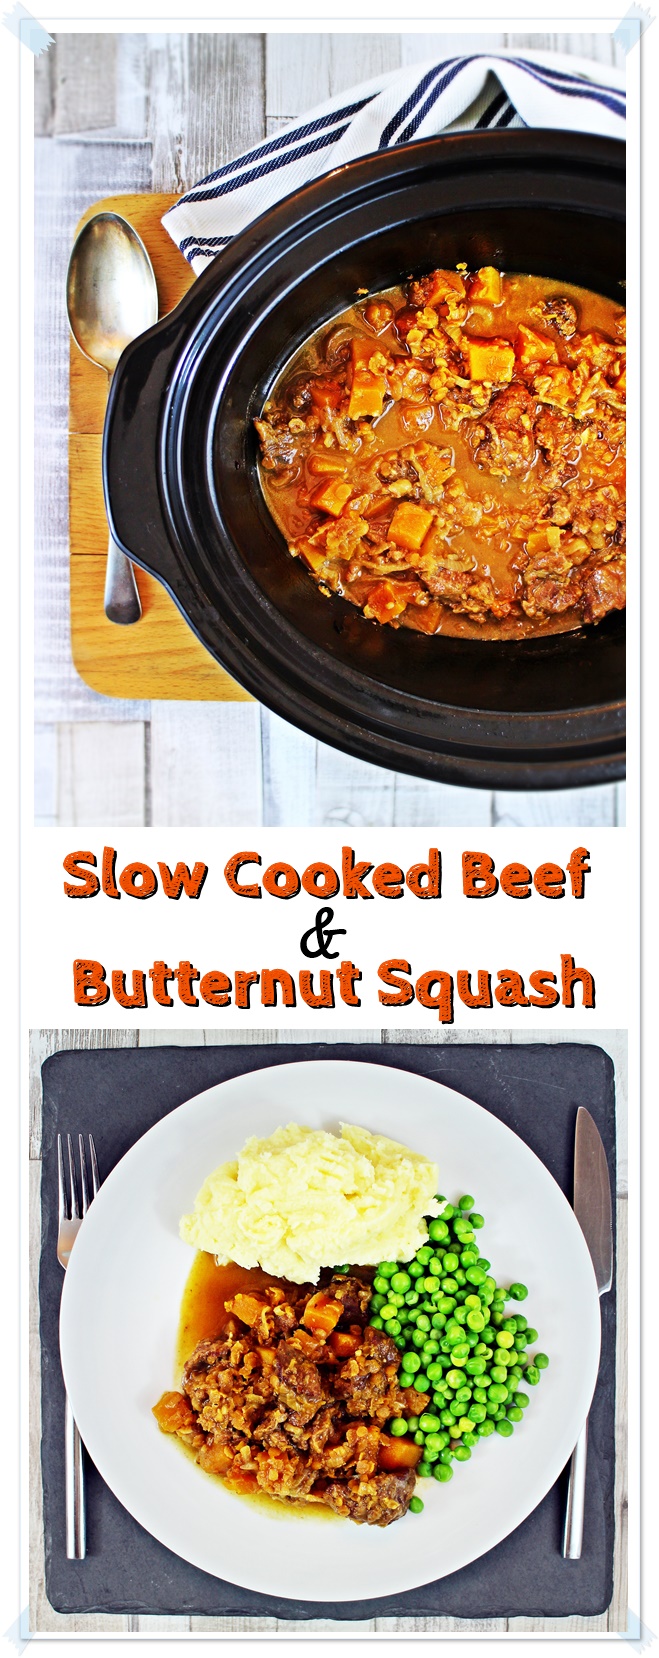 Slow Cooked Beef & Butternut Squash - Fab Food 4 All